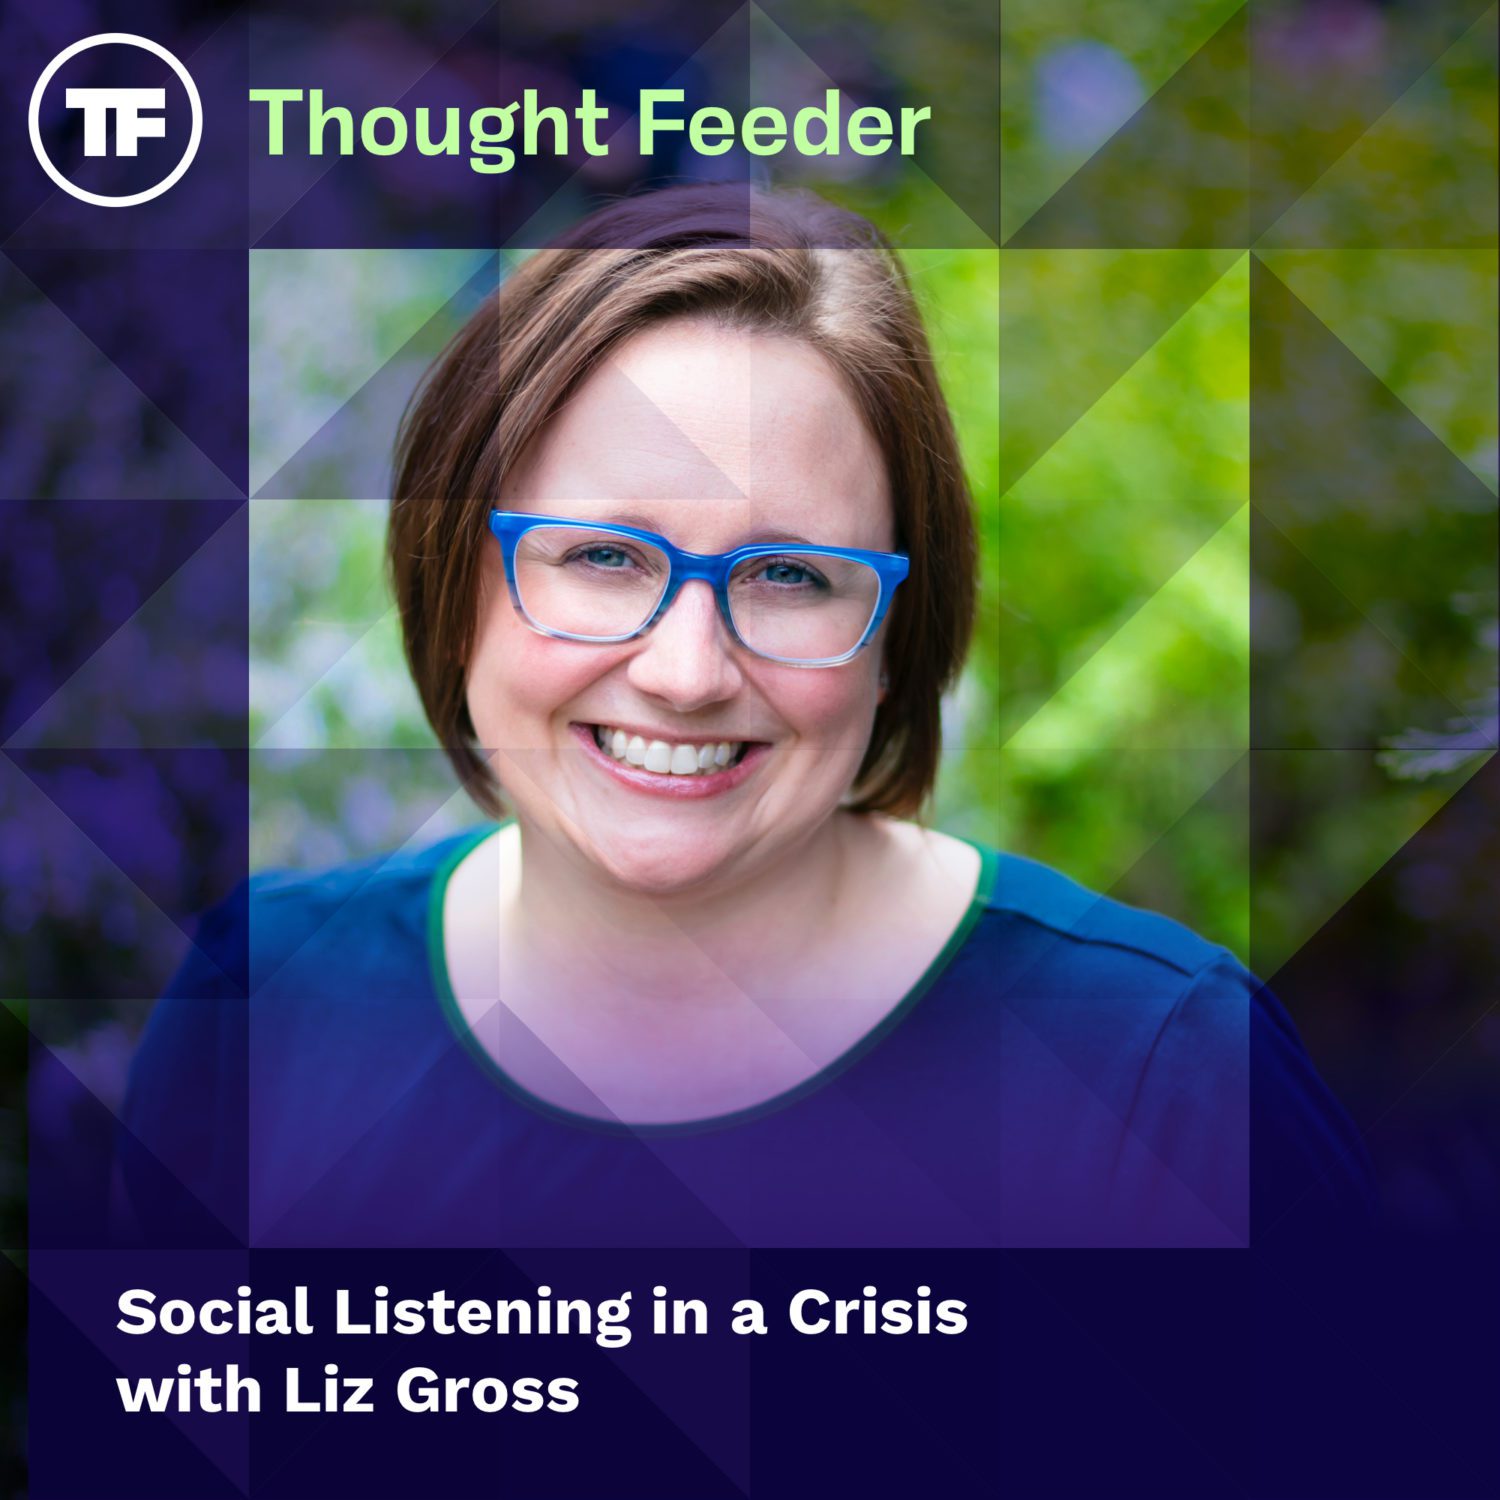 Social Listening in a Crisis with Liz Gross